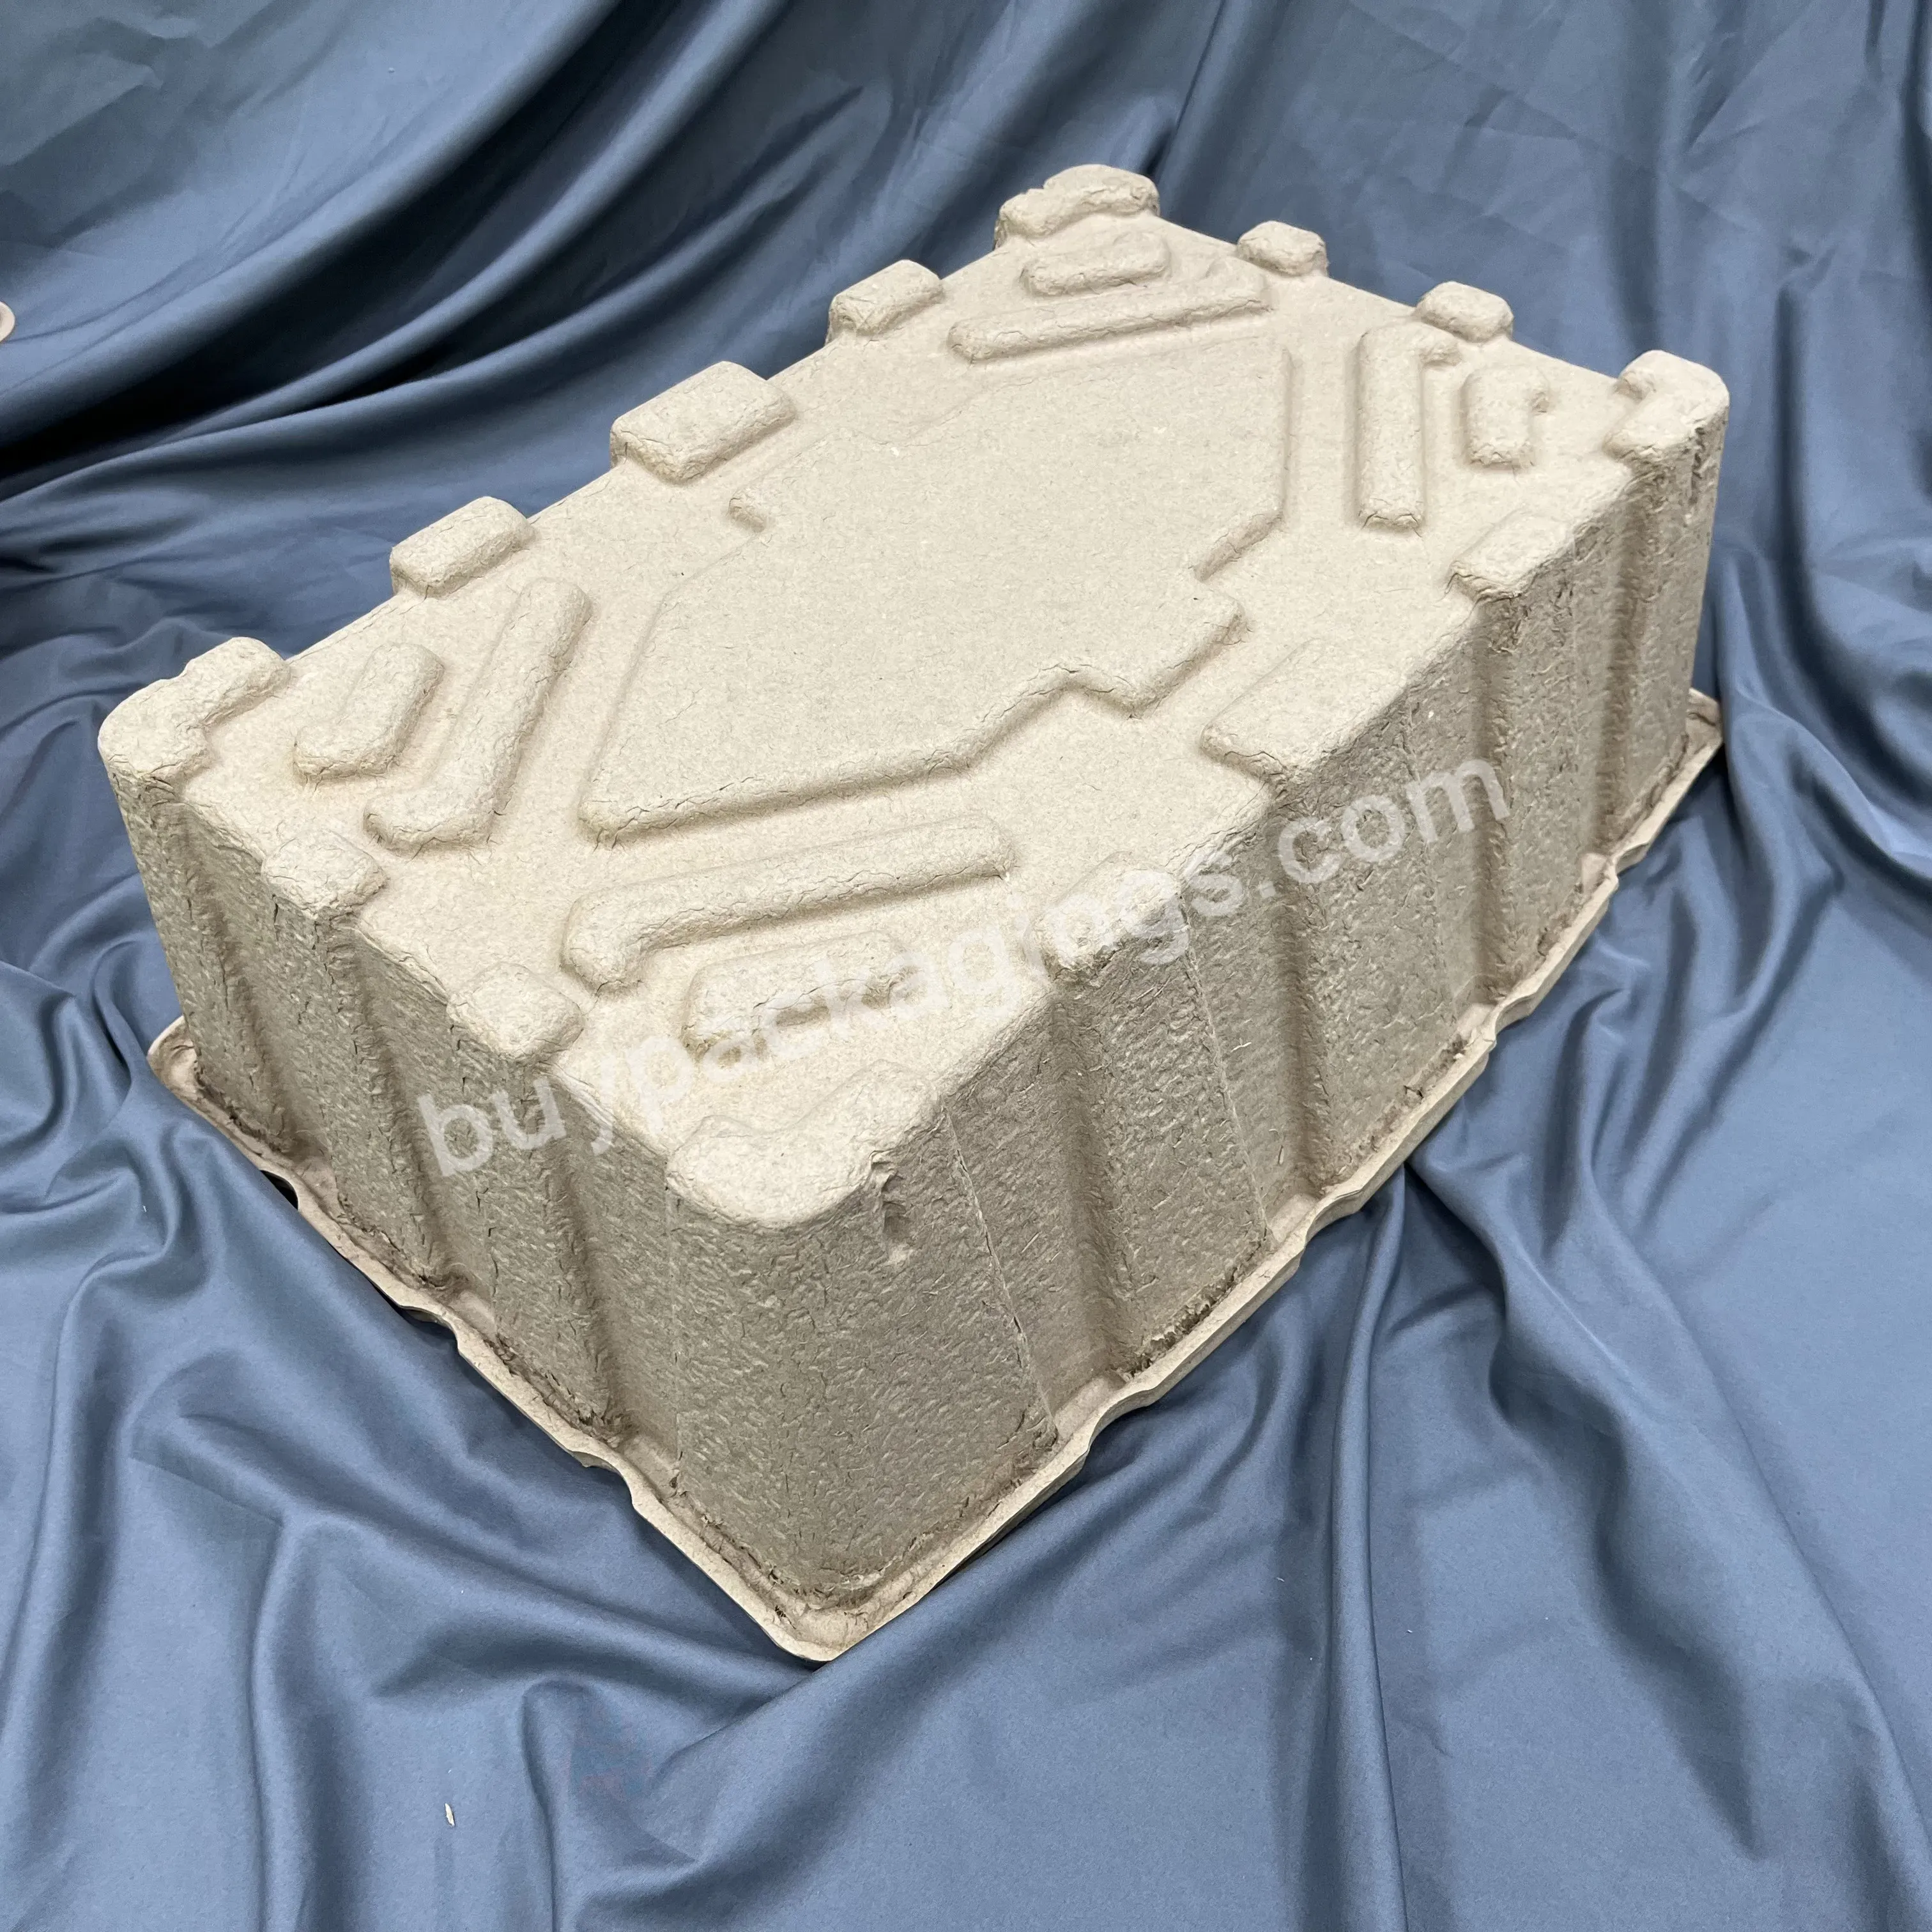 One Time Customization Of Cat Litter Basin Paper Pulp Tray Manufacturer Wet Molded Pulp Wet Pulp Molding